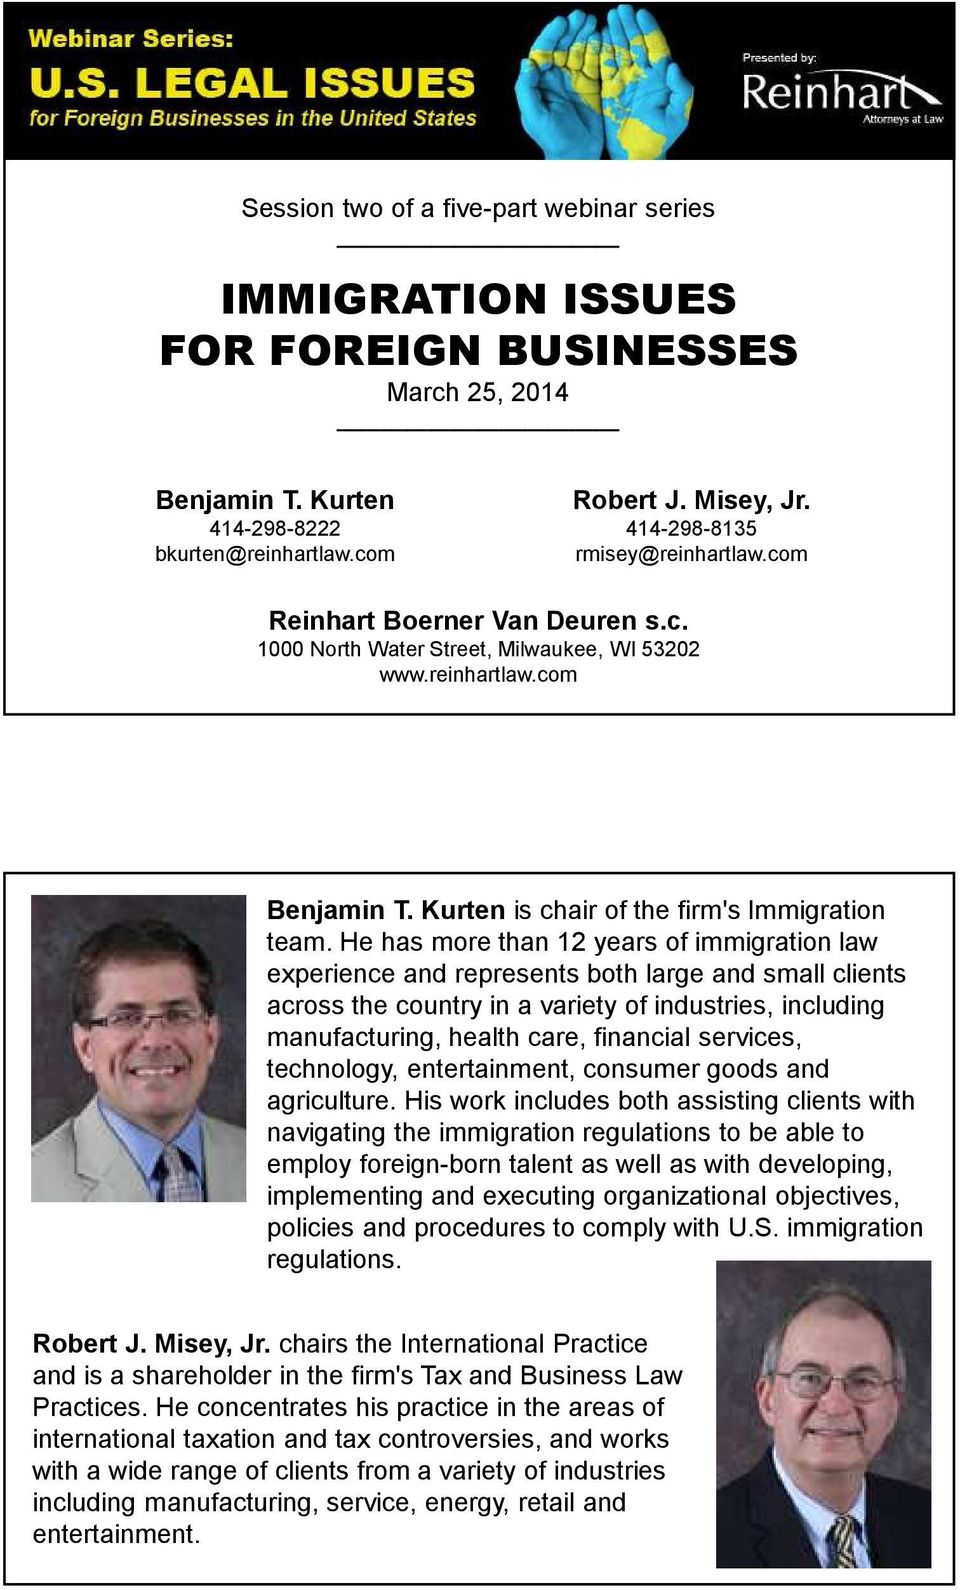 He has more than 12 years of immigration law experience and represents both large and small clients across the country in a variety of industries, including manufacturing, health care, financial